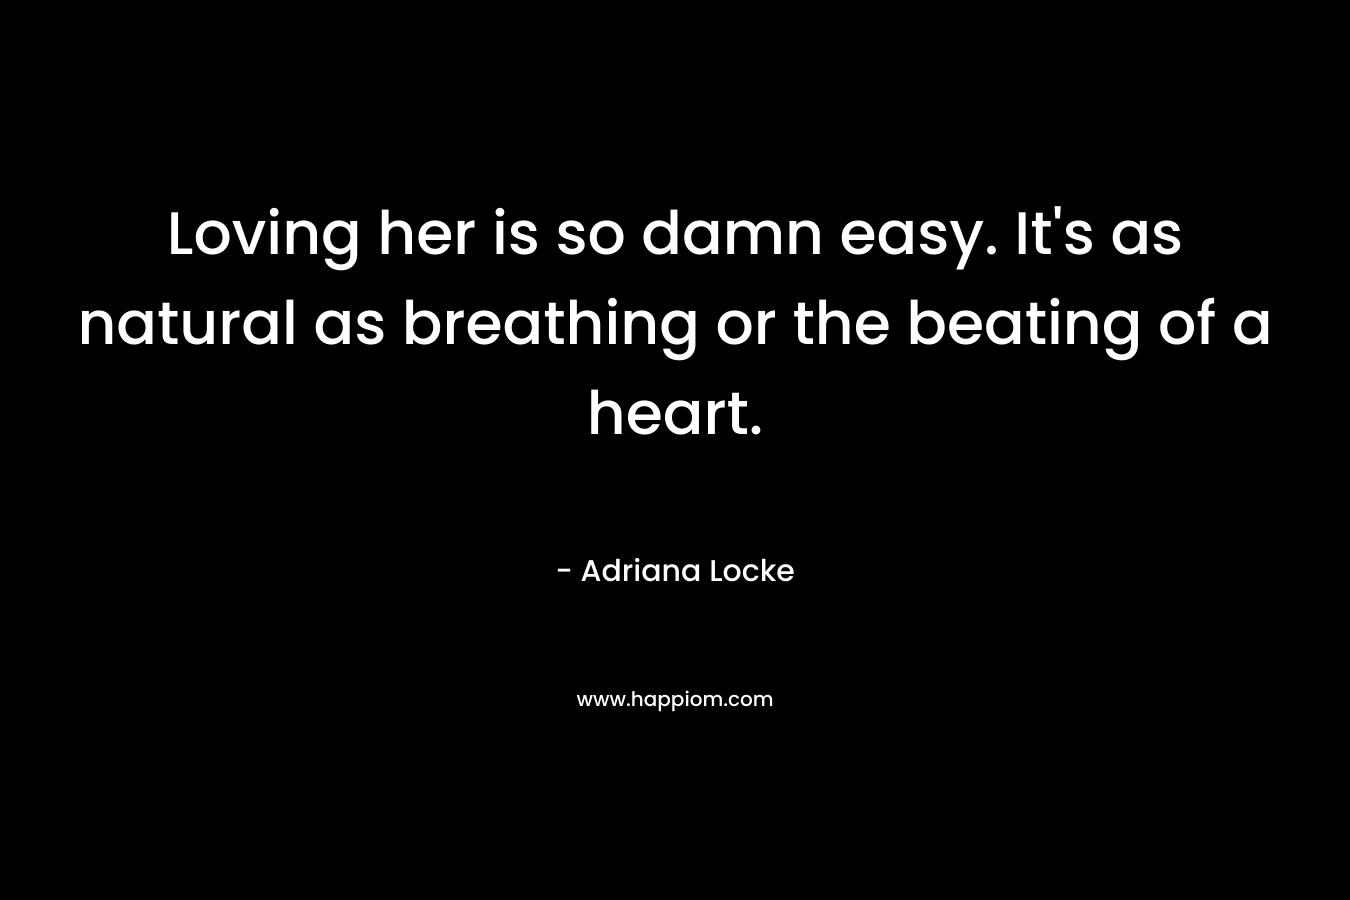 Loving her is so damn easy. It’s as natural as breathing or the beating of a heart. – Adriana Locke